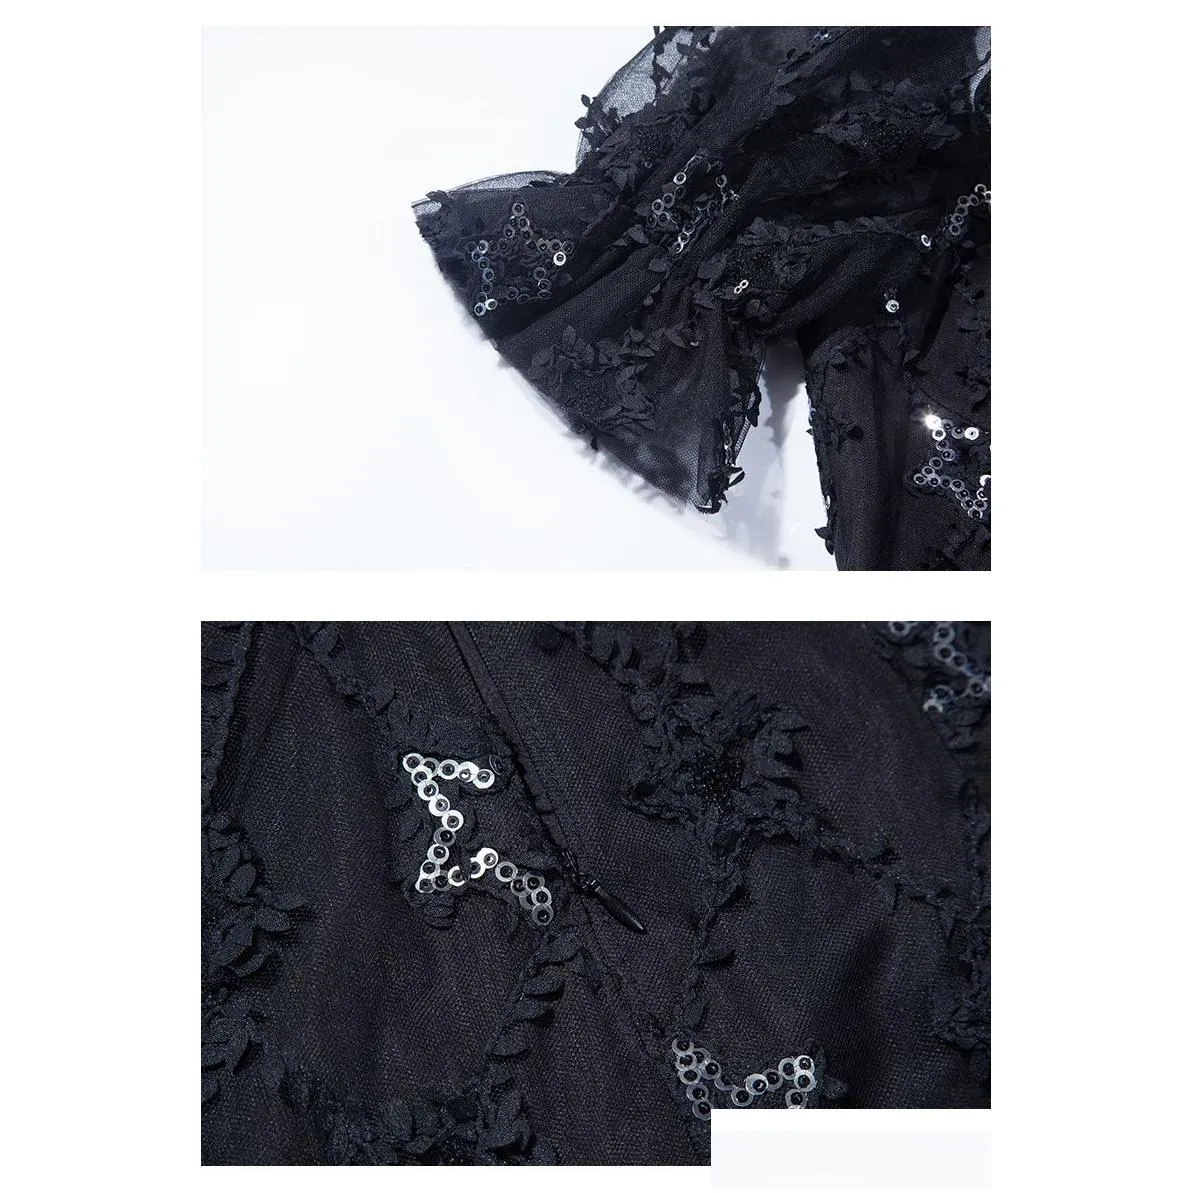 2023 summer black stars embroidery sequins tulle dress short sleeve square neck short casual dresses y3m256679